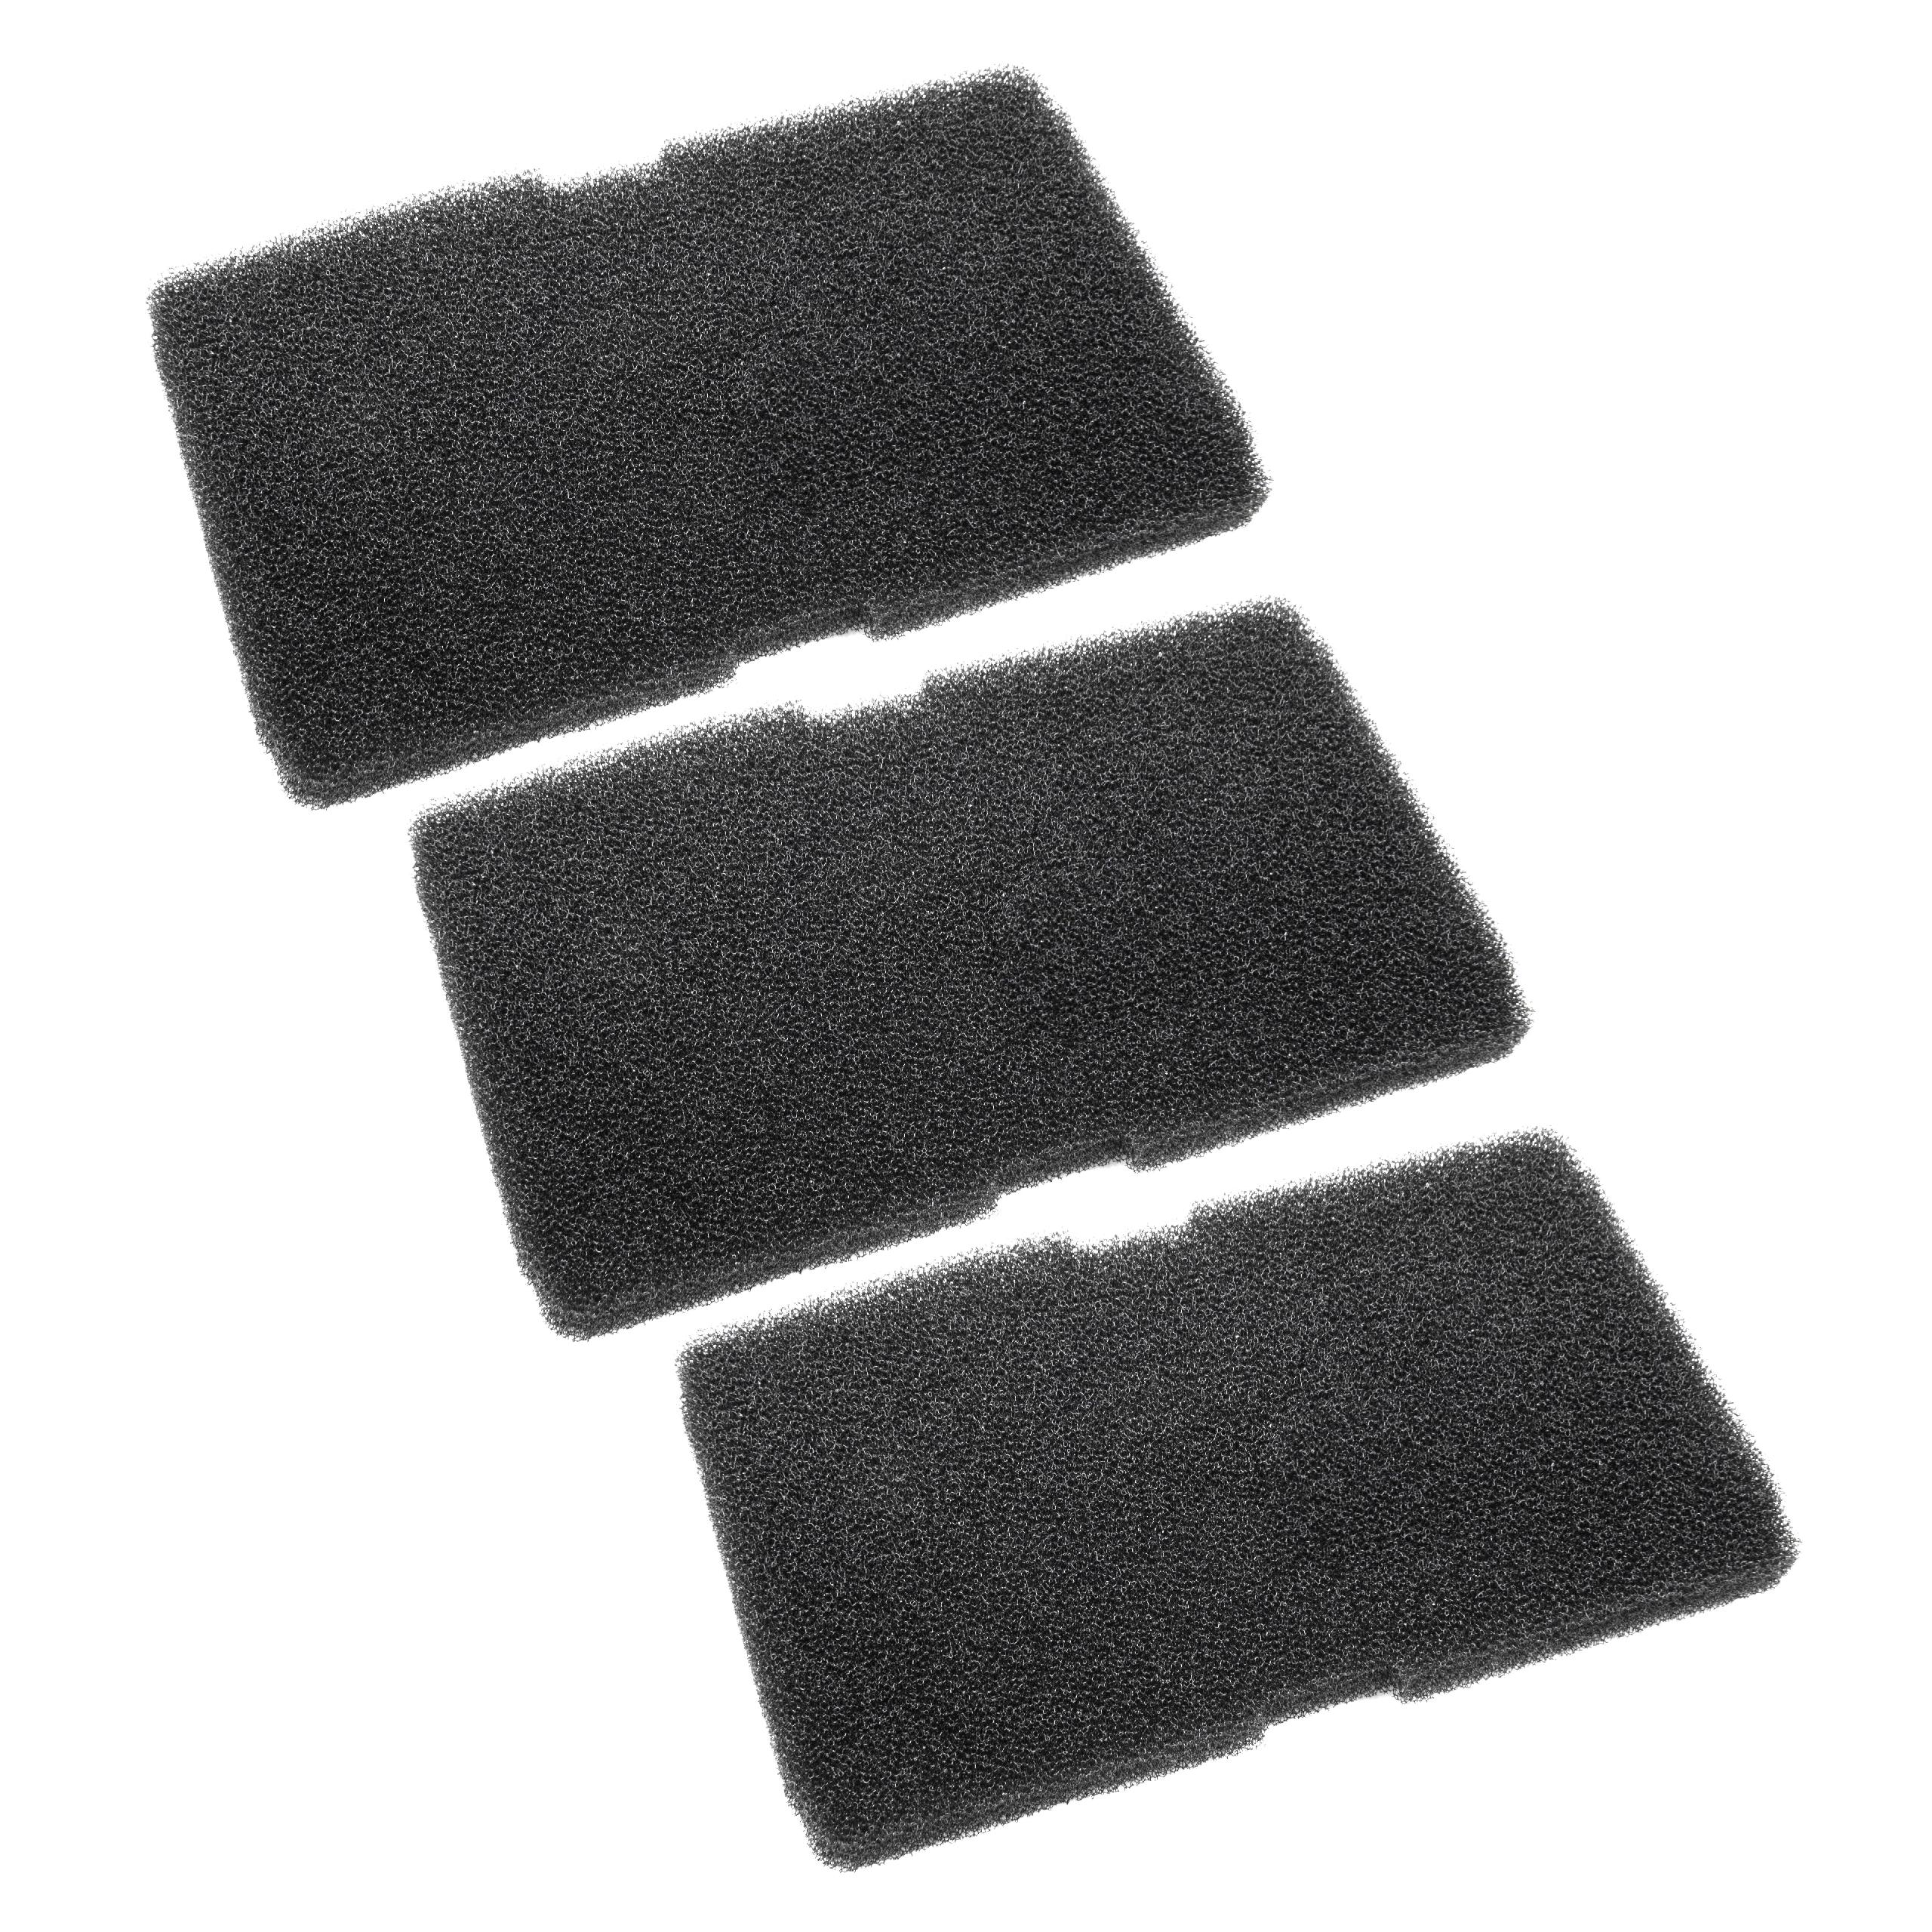 Filter Set (3x sponge filter) as Replacement for Blomberg 2964840200, 782372152 Tumble Dryer etc.